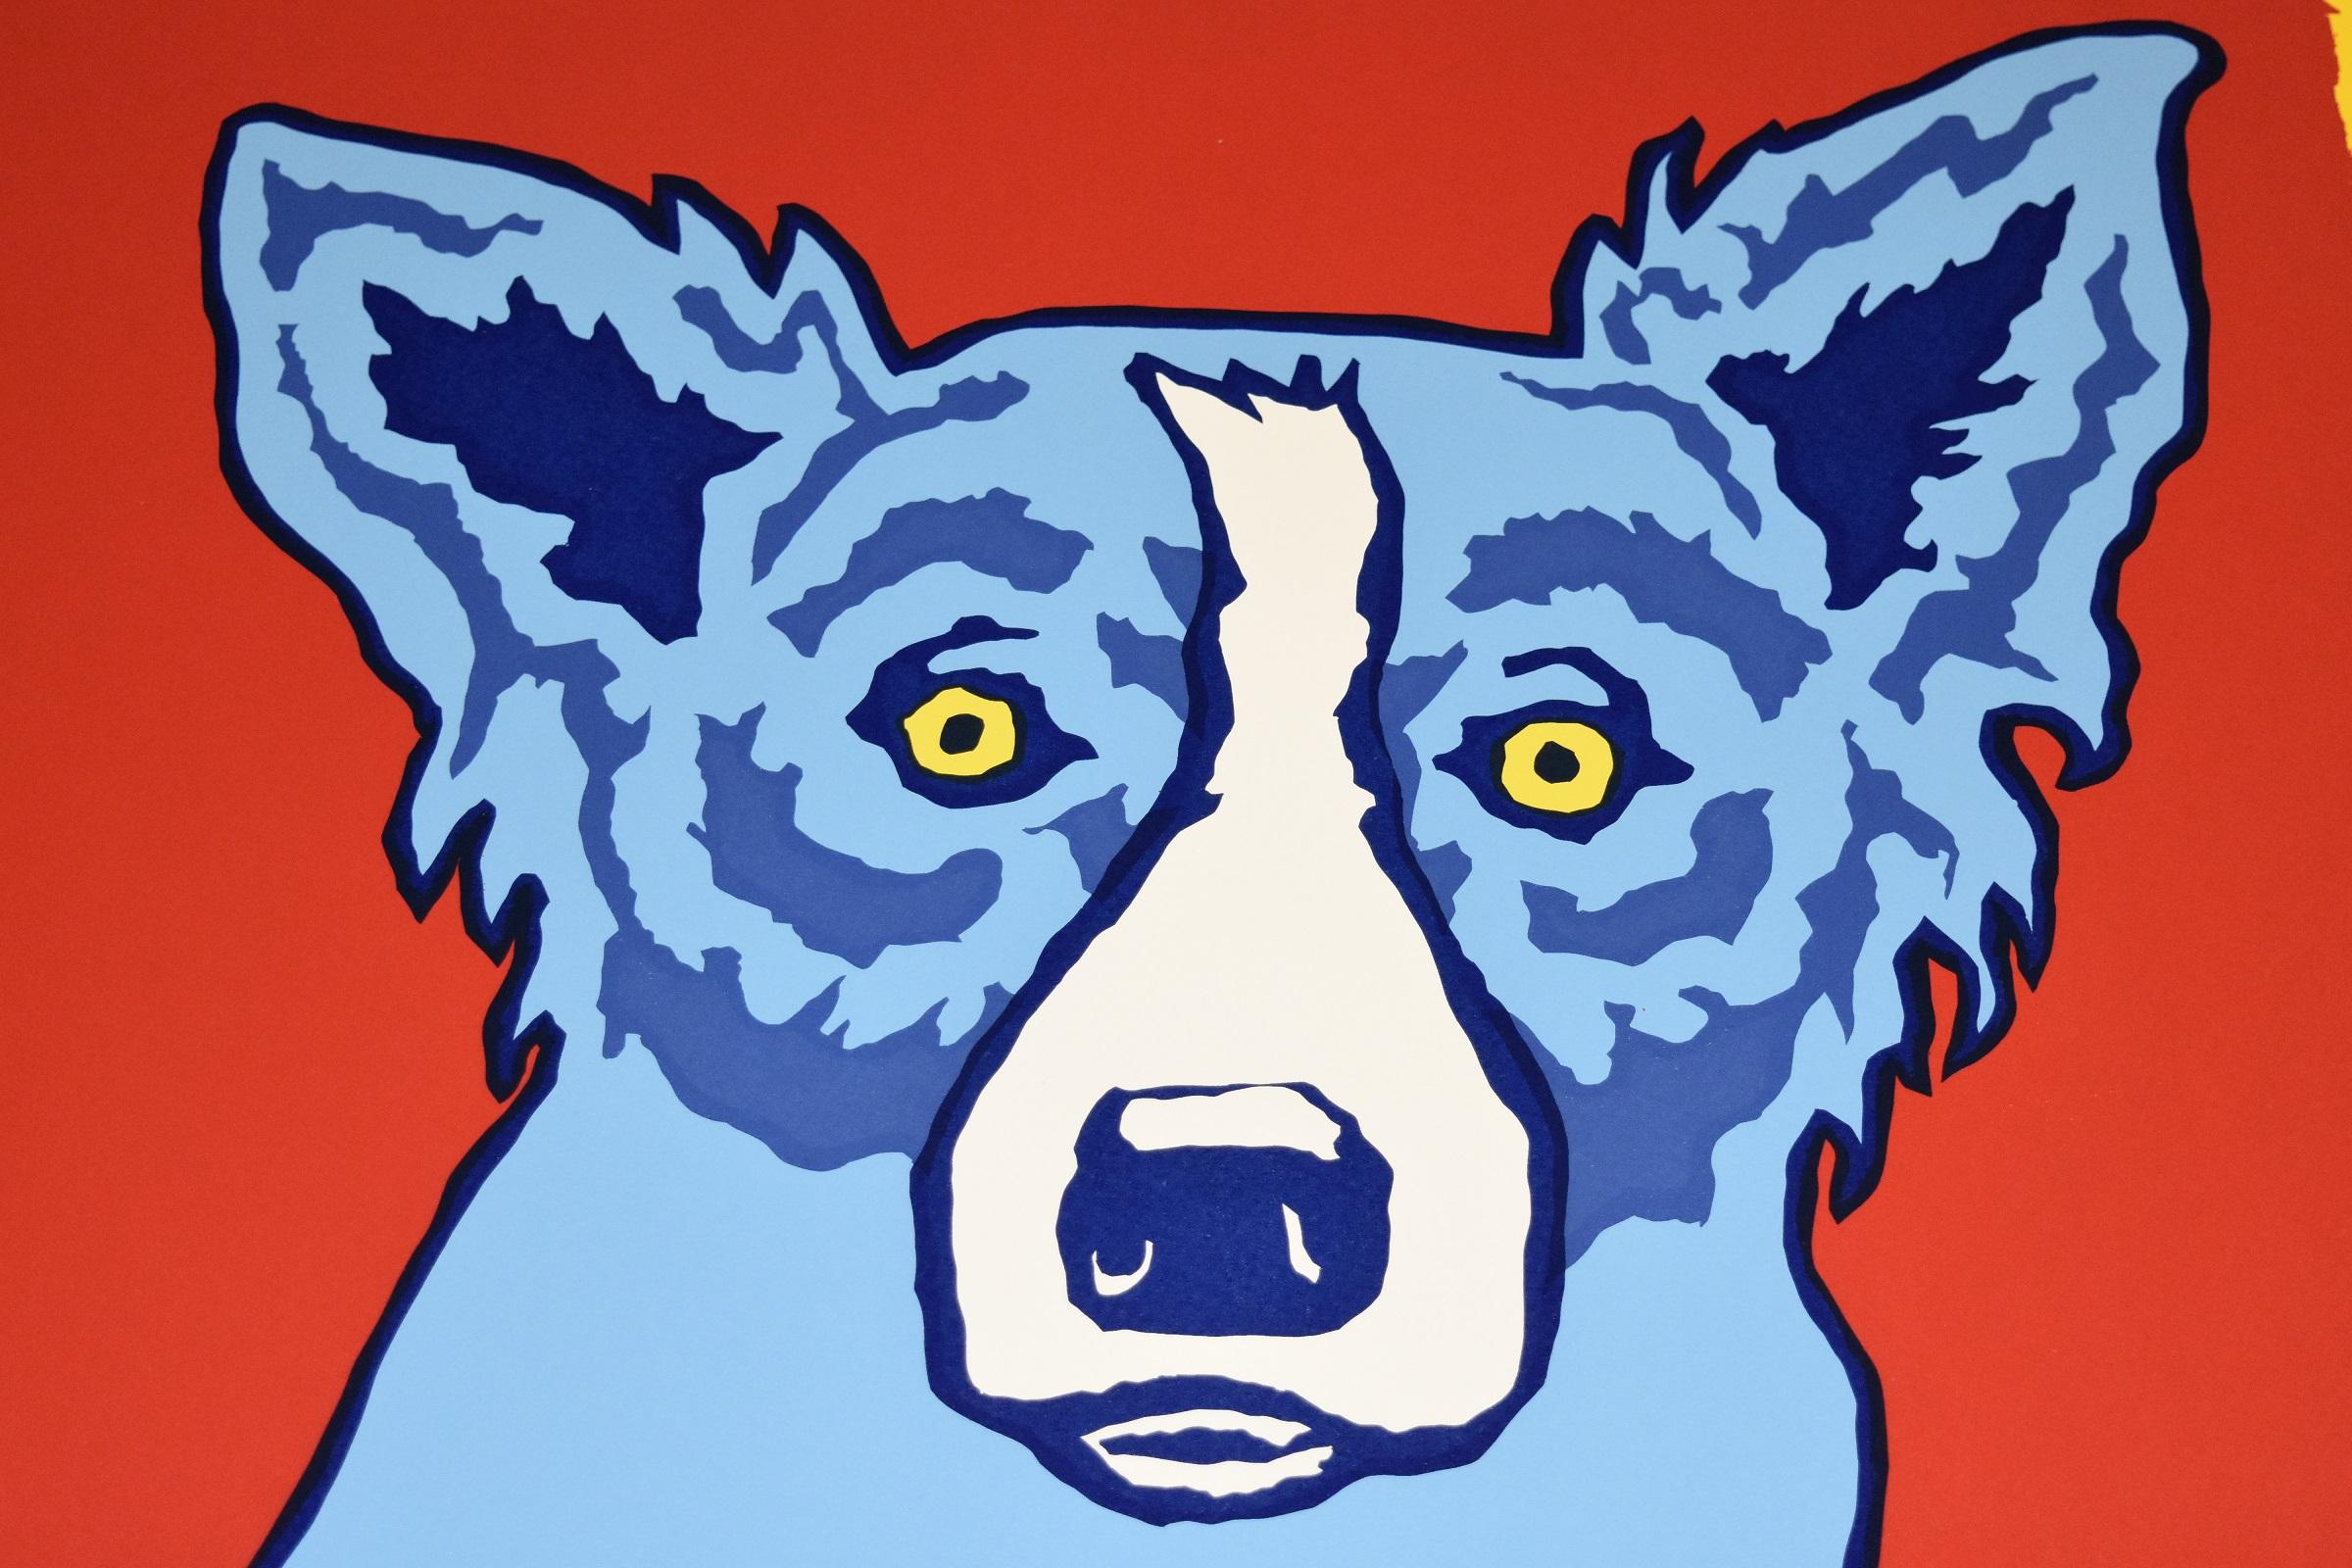 Artist:  George Rodrigue
Title:  Blue Dog “Top Dog - Red”
Medium:  Silkscreen 	
Date:  1992
Edition:  Artist Proof
Dimensions:  22 X 28”
Description:  Signed & Unframed 
Condition:  Excellent 
